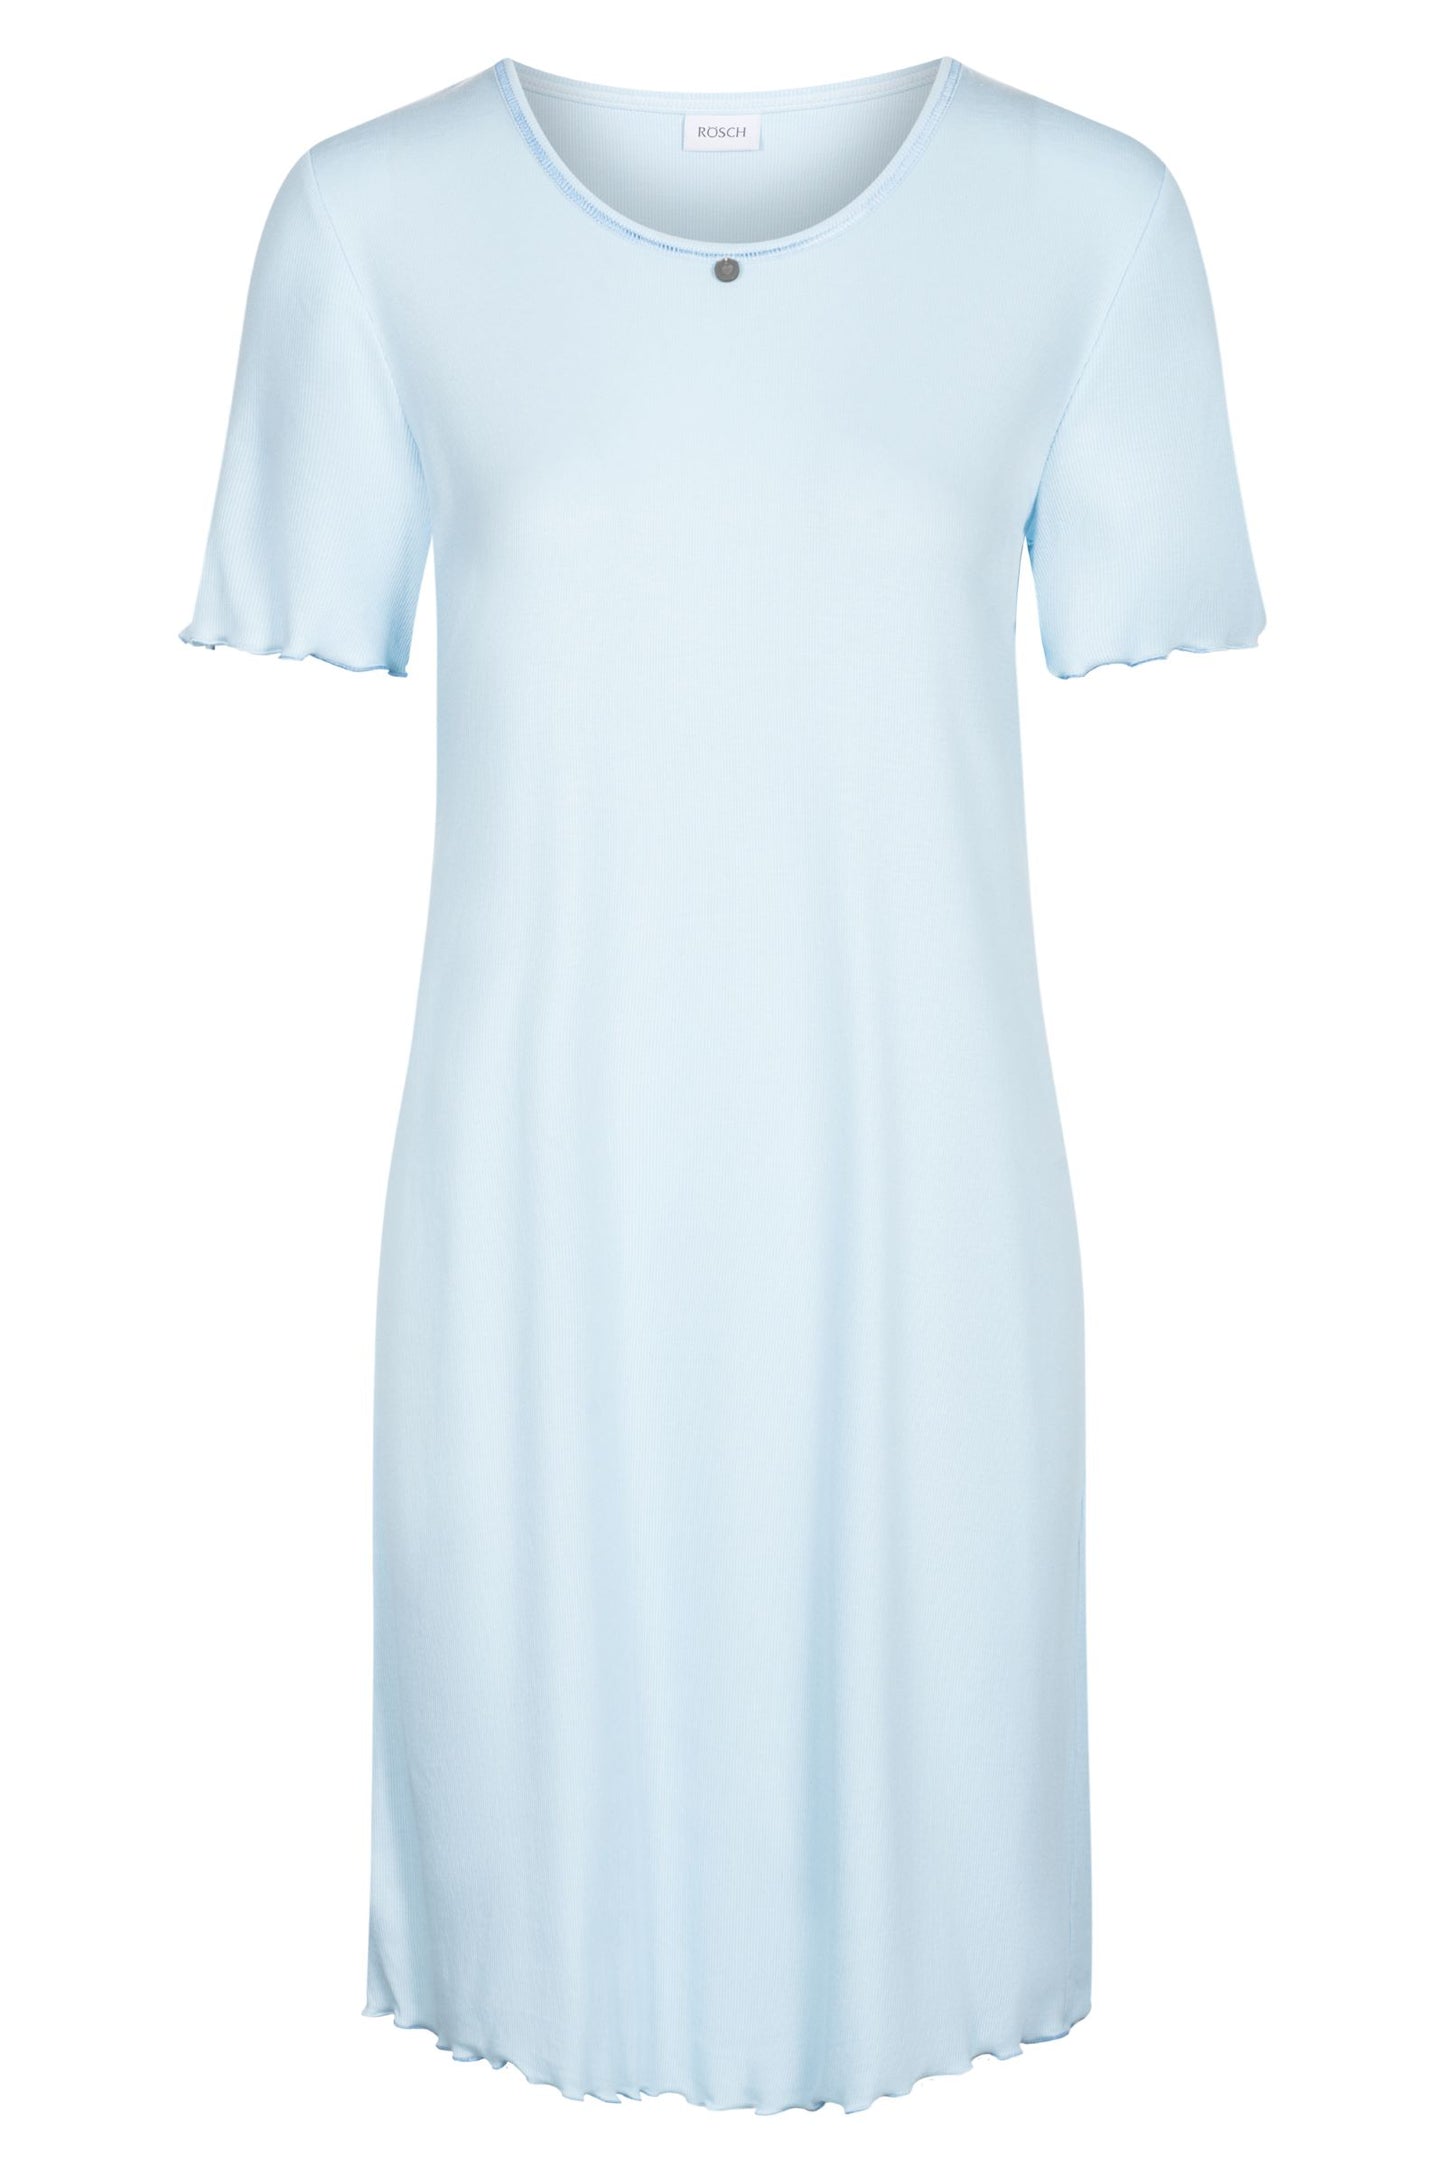 This smart casual nightgown from Rösch is composed of a light, soft, and elastic fine-rib fabric, a combination of cotton and modal that provides breathability, smoothness, and durability. The combination of the two fibers offers superior thermal regulation and superior comfort during sleep, as well as full freedom of movement for a precise fit.  Short sleeve  Round-neck with decorative detail